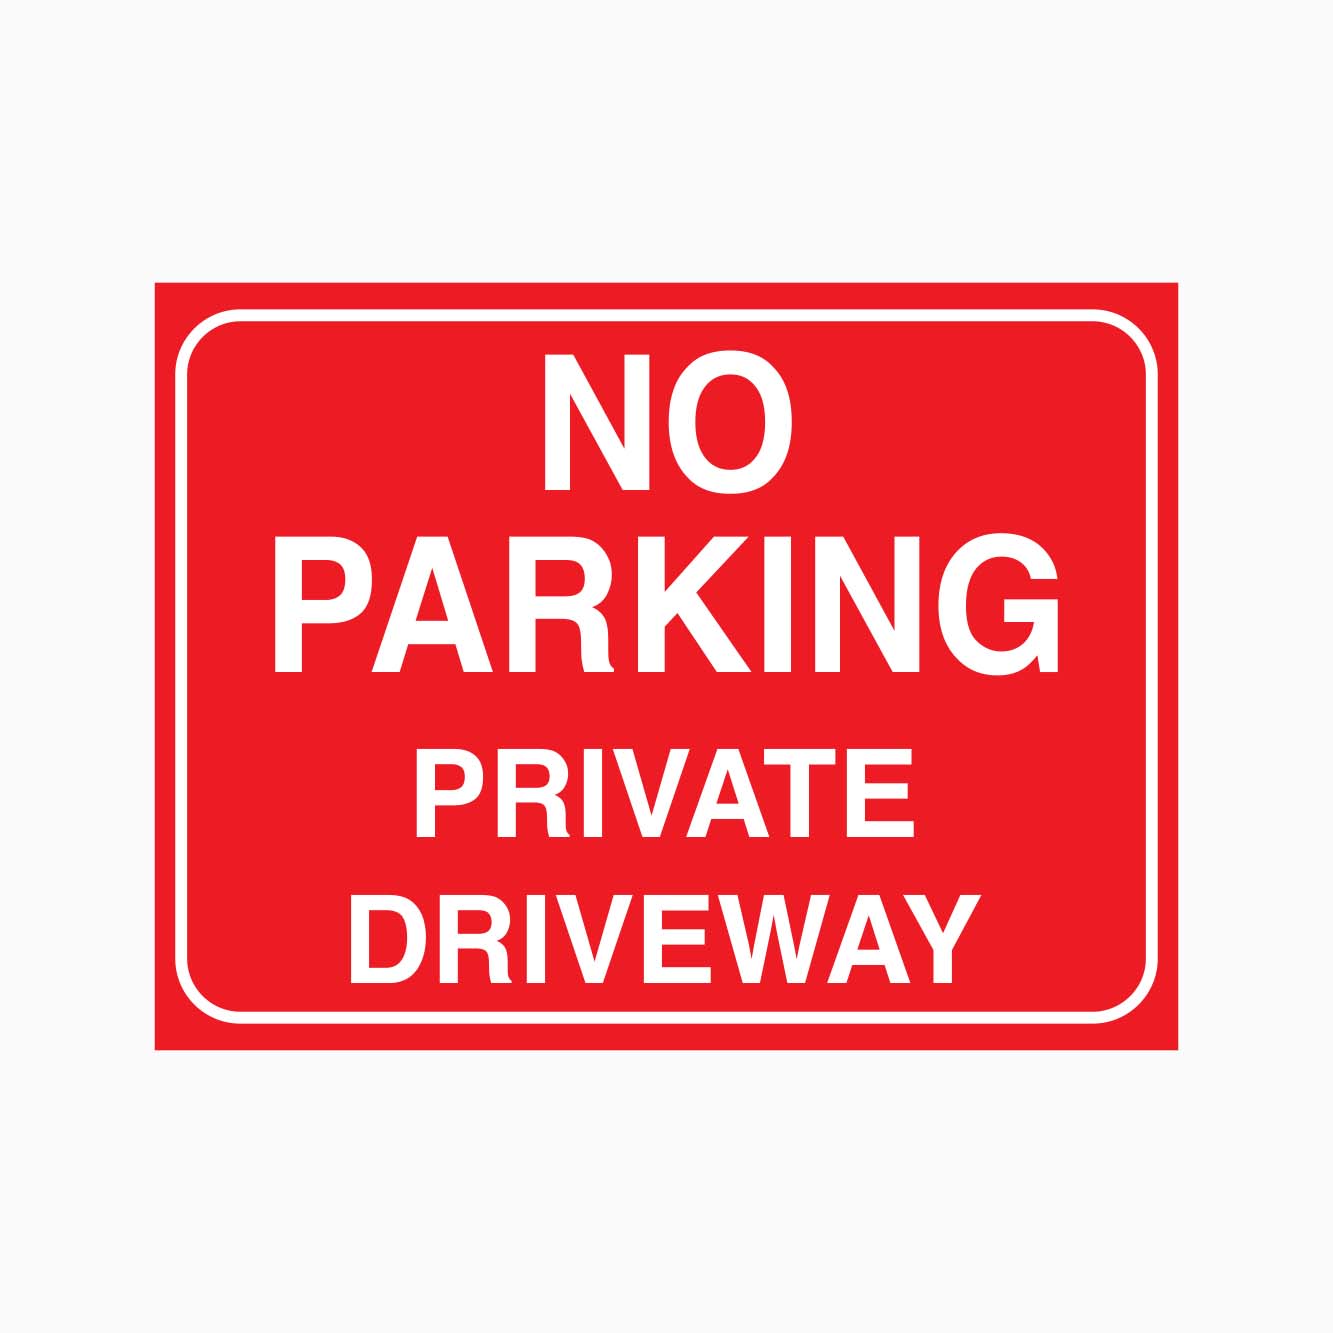 NO PARKING PRIVATE DRIVEWAY SIGN - GET SIGNS